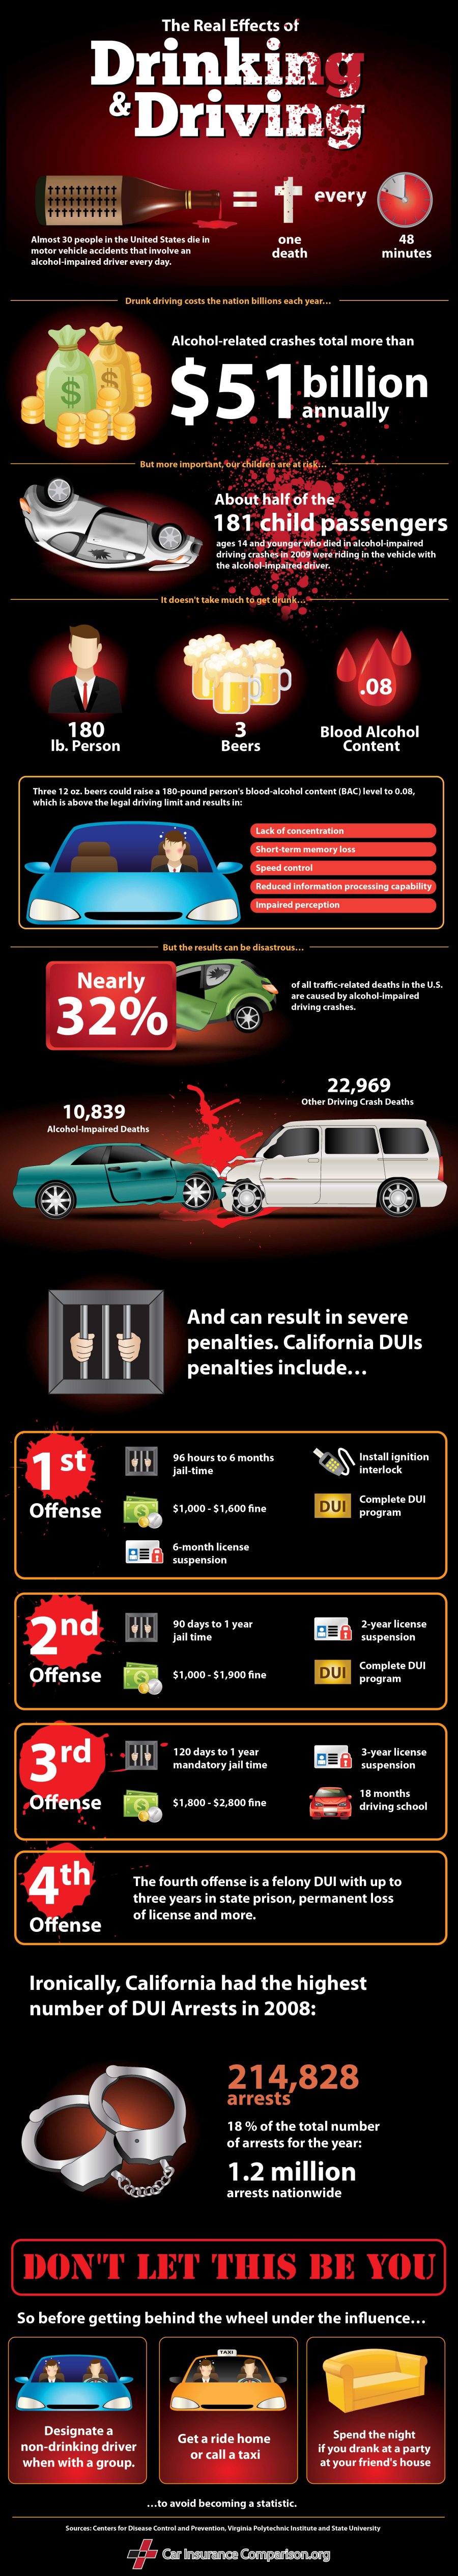 InfoGraphic on Drunk Driving,